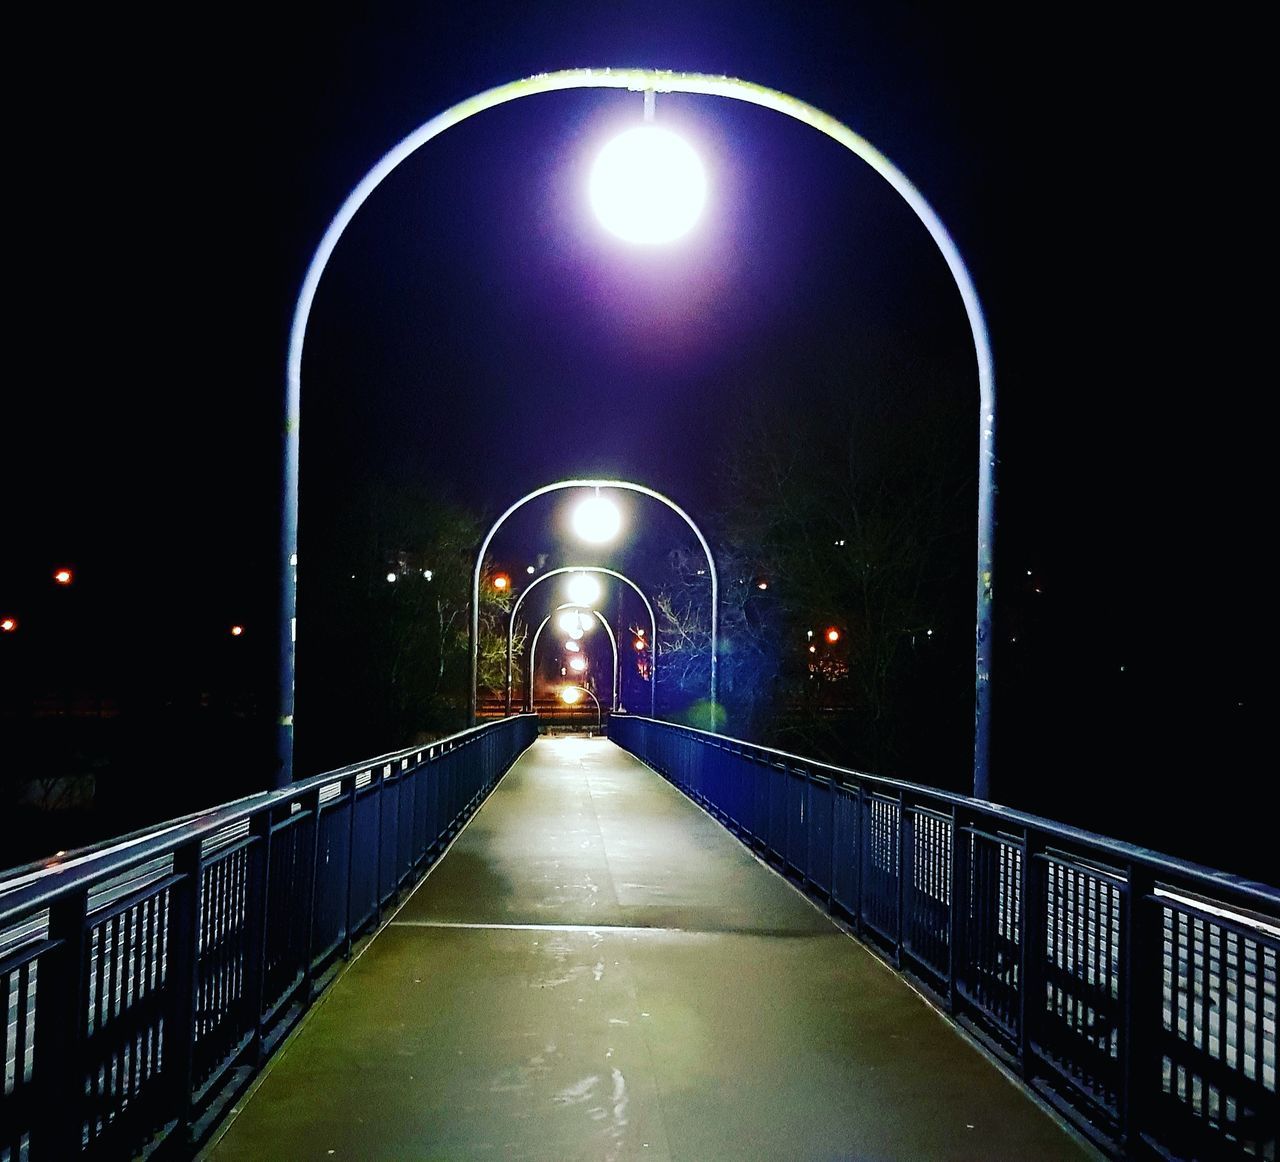 illuminated, night, railing, the way forward, lighting equipment, bridge - man made structure, street light, architecture, outdoors, no people, moon, built structure, sky